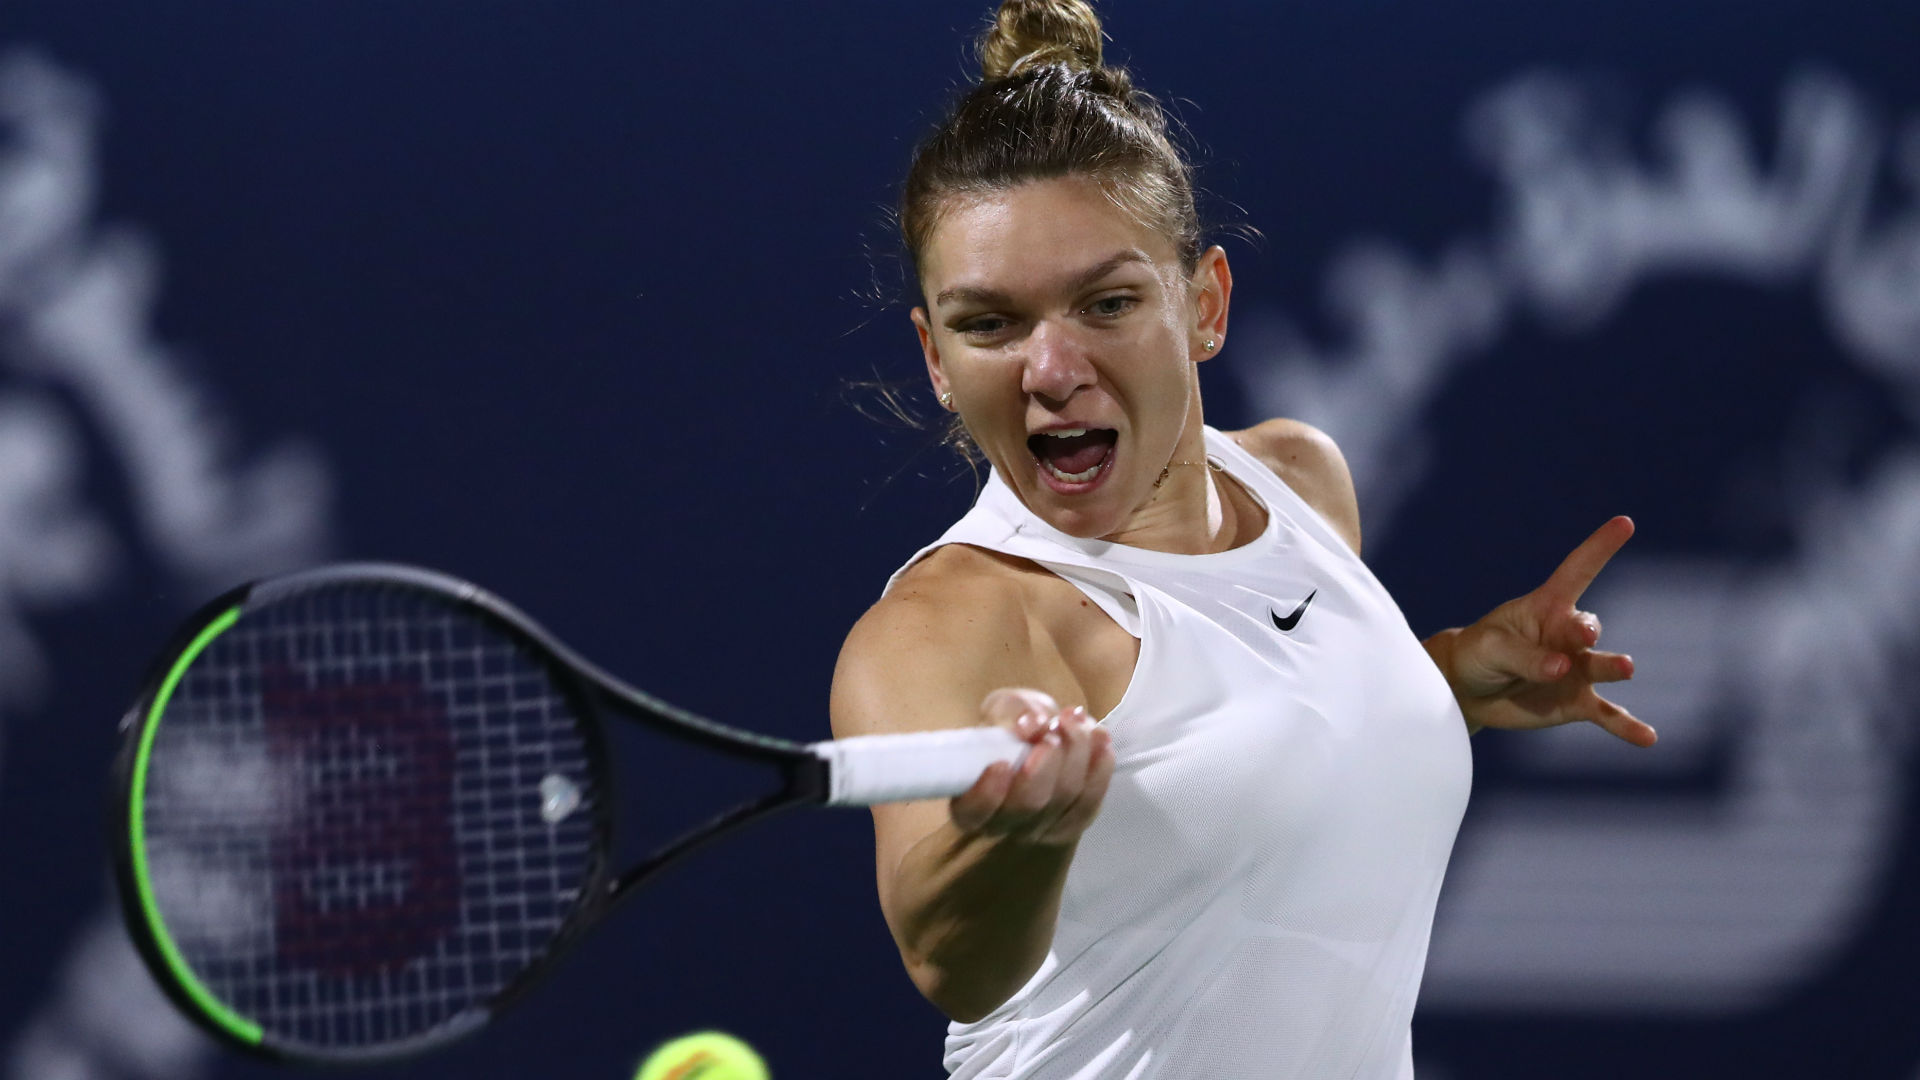 Dubai Tennis Championships top seed Simona Halep is into the final where she will face in-form 20-year-old Elena Rybakina.